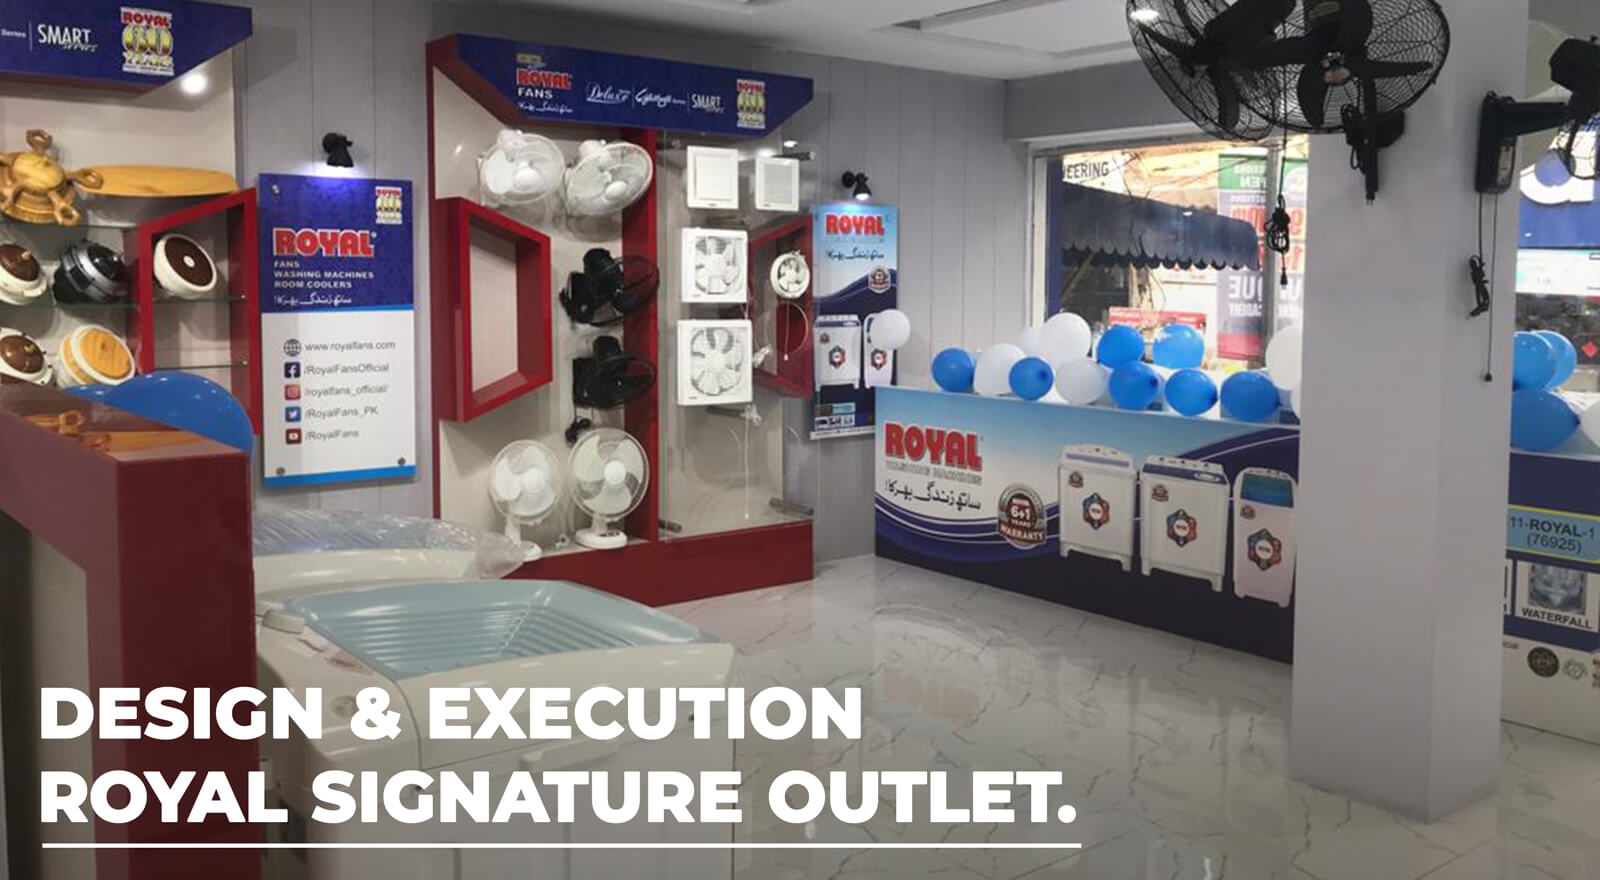 DESIGN AND EXECUTION ROYAL SIGNATURE OUTLET